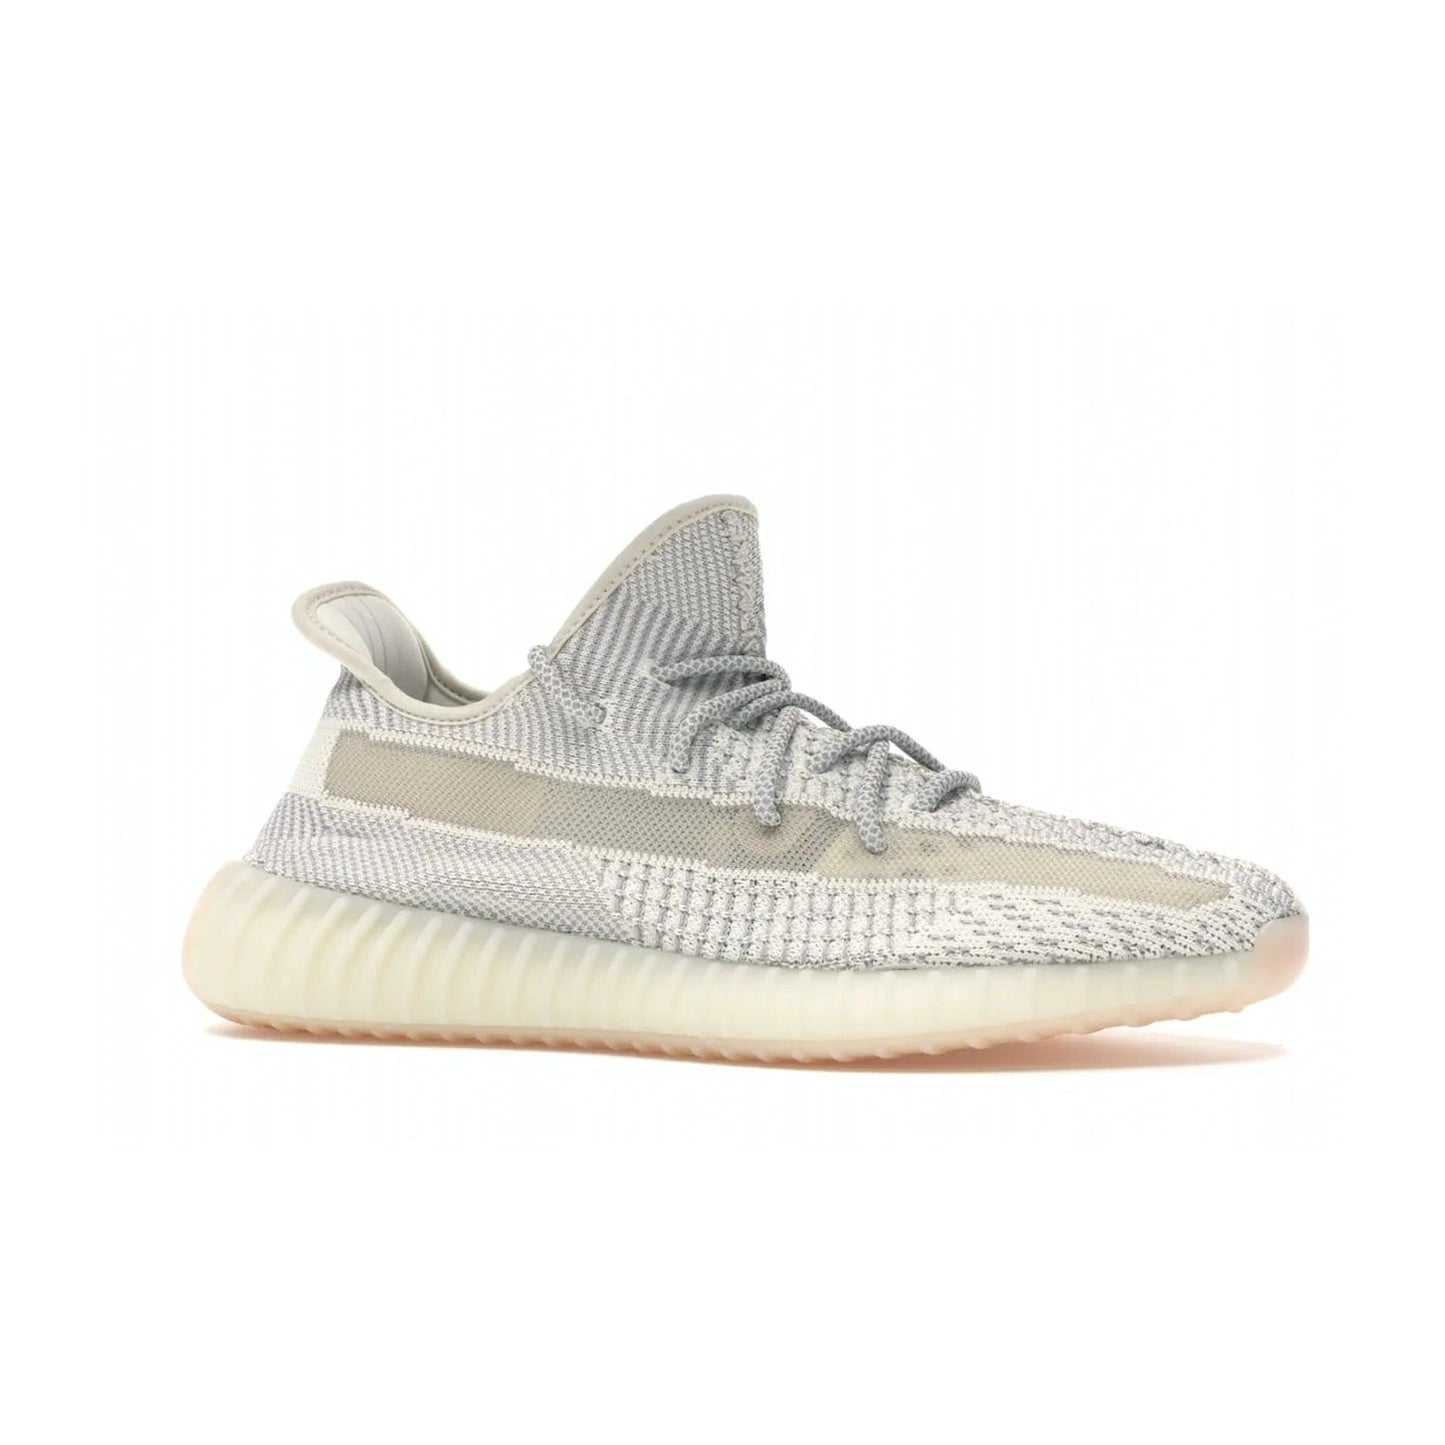 adidas Yeezy Boost 350 V2 Lundmark (Non Reflective) - Image 3 - Only at www.BallersClubKickz.com - Shop the exclusive adidas Yeezy Boost 350 V2 Lundmark with a subtle summer color, mesh upper, white-to-cream transitional midsole, light tan outsole, and pink middle stripe. Comfort and style come together in this perfect summer 350 V2. Released on July 11, 2019.